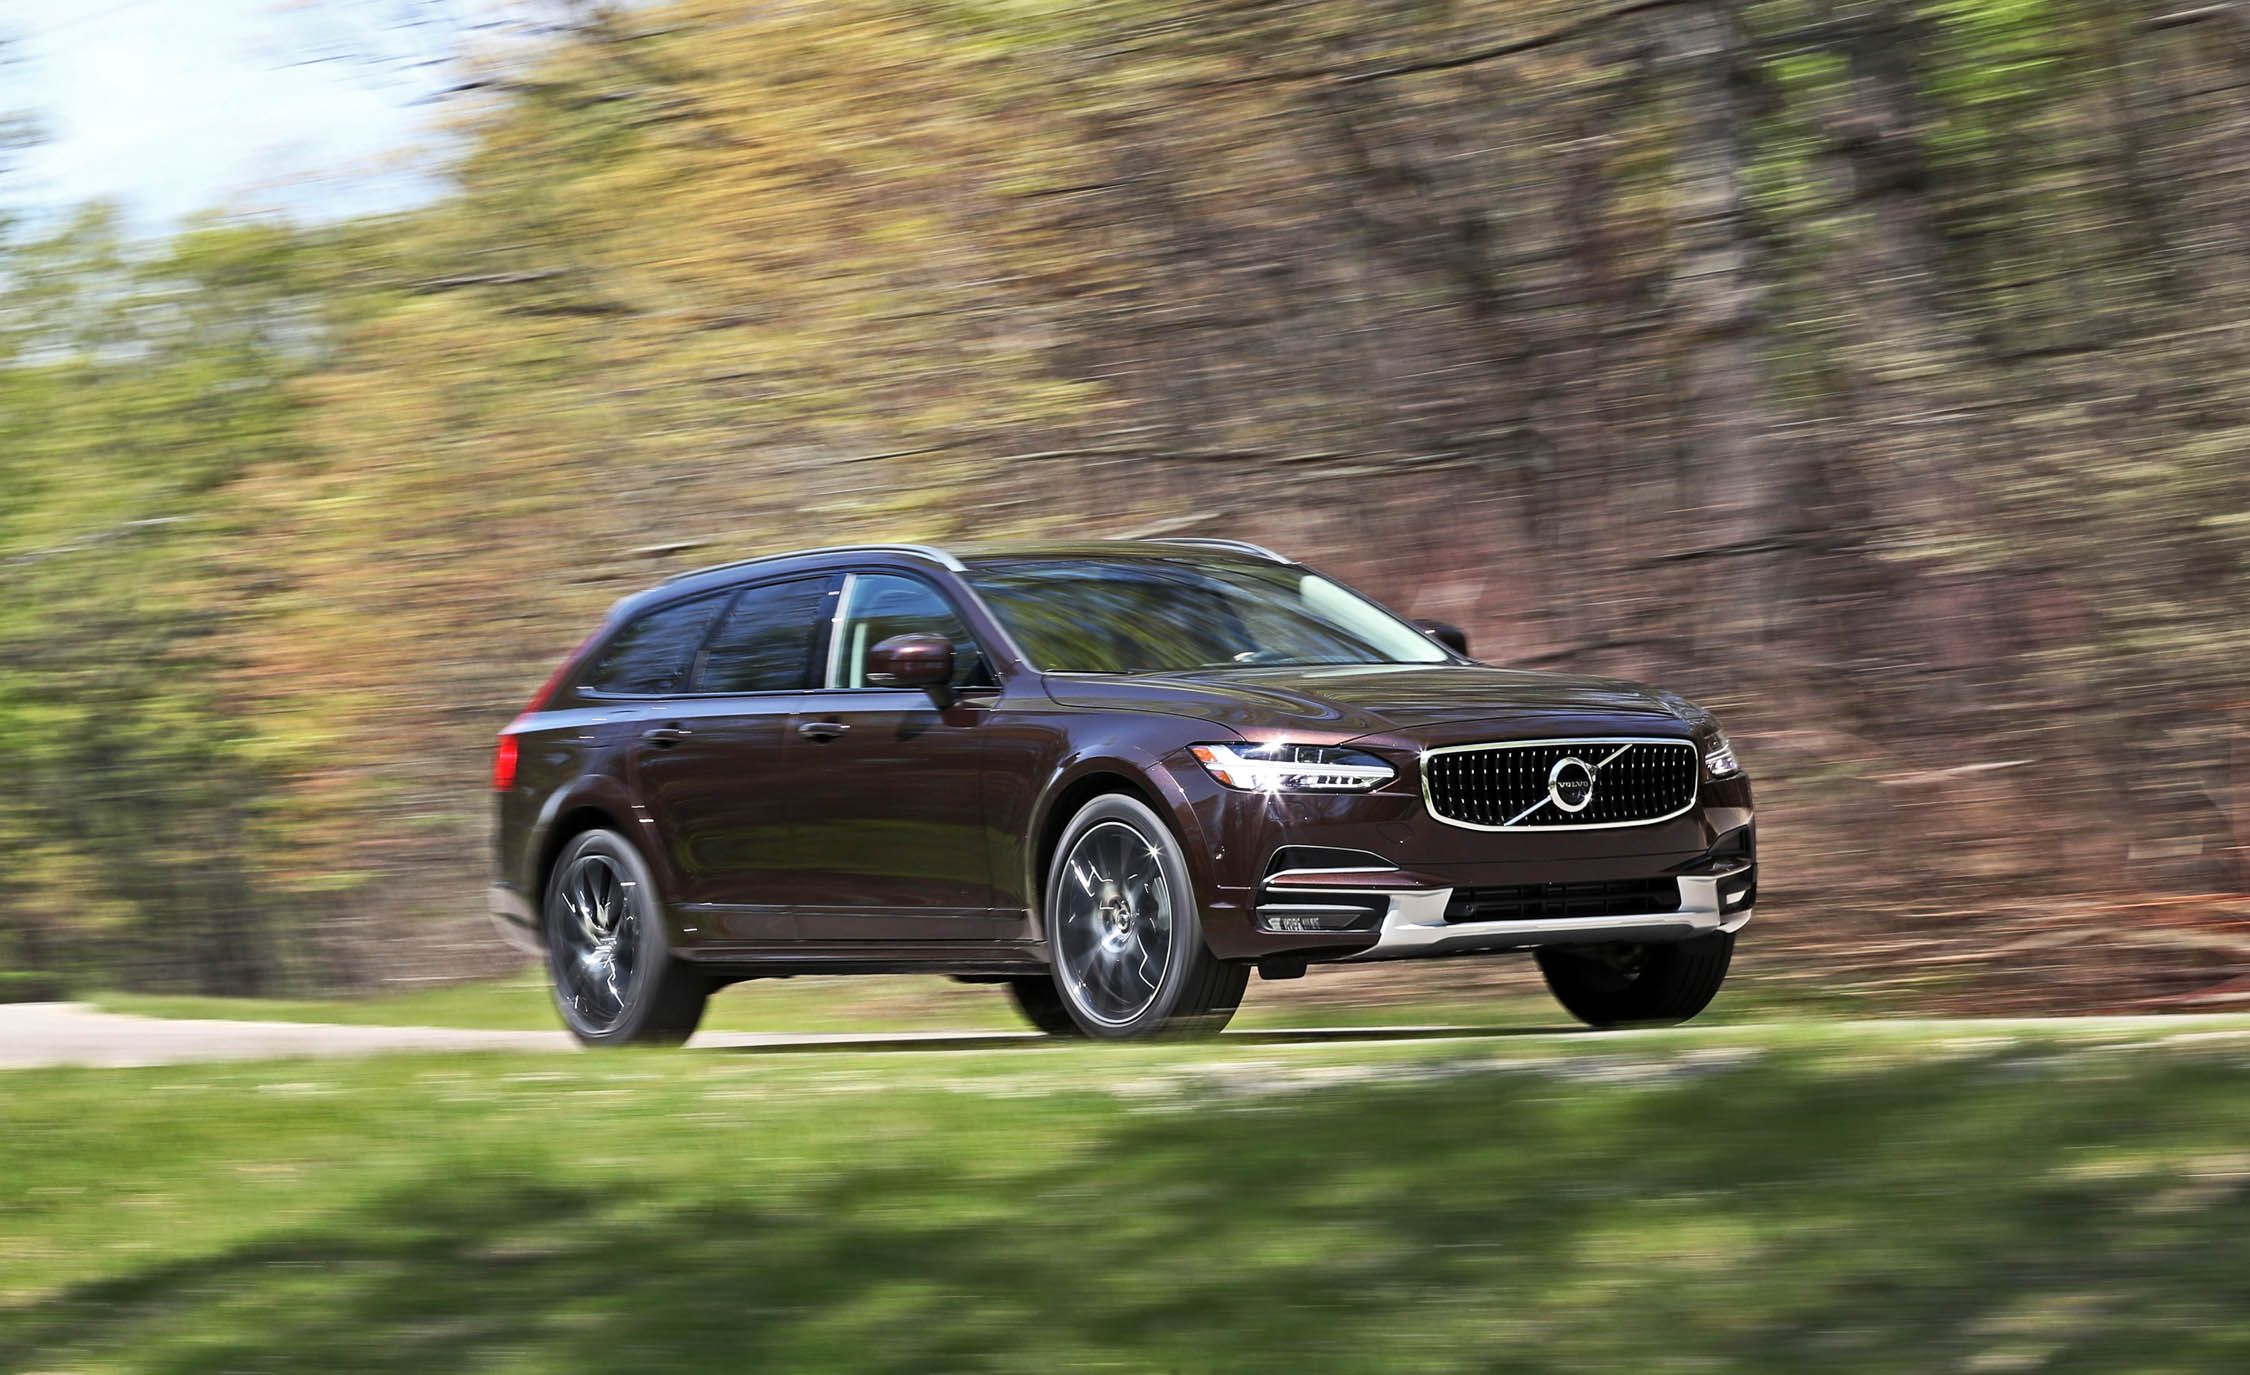 2018 Volvo V90 V90 Cross Country Performance And Driving